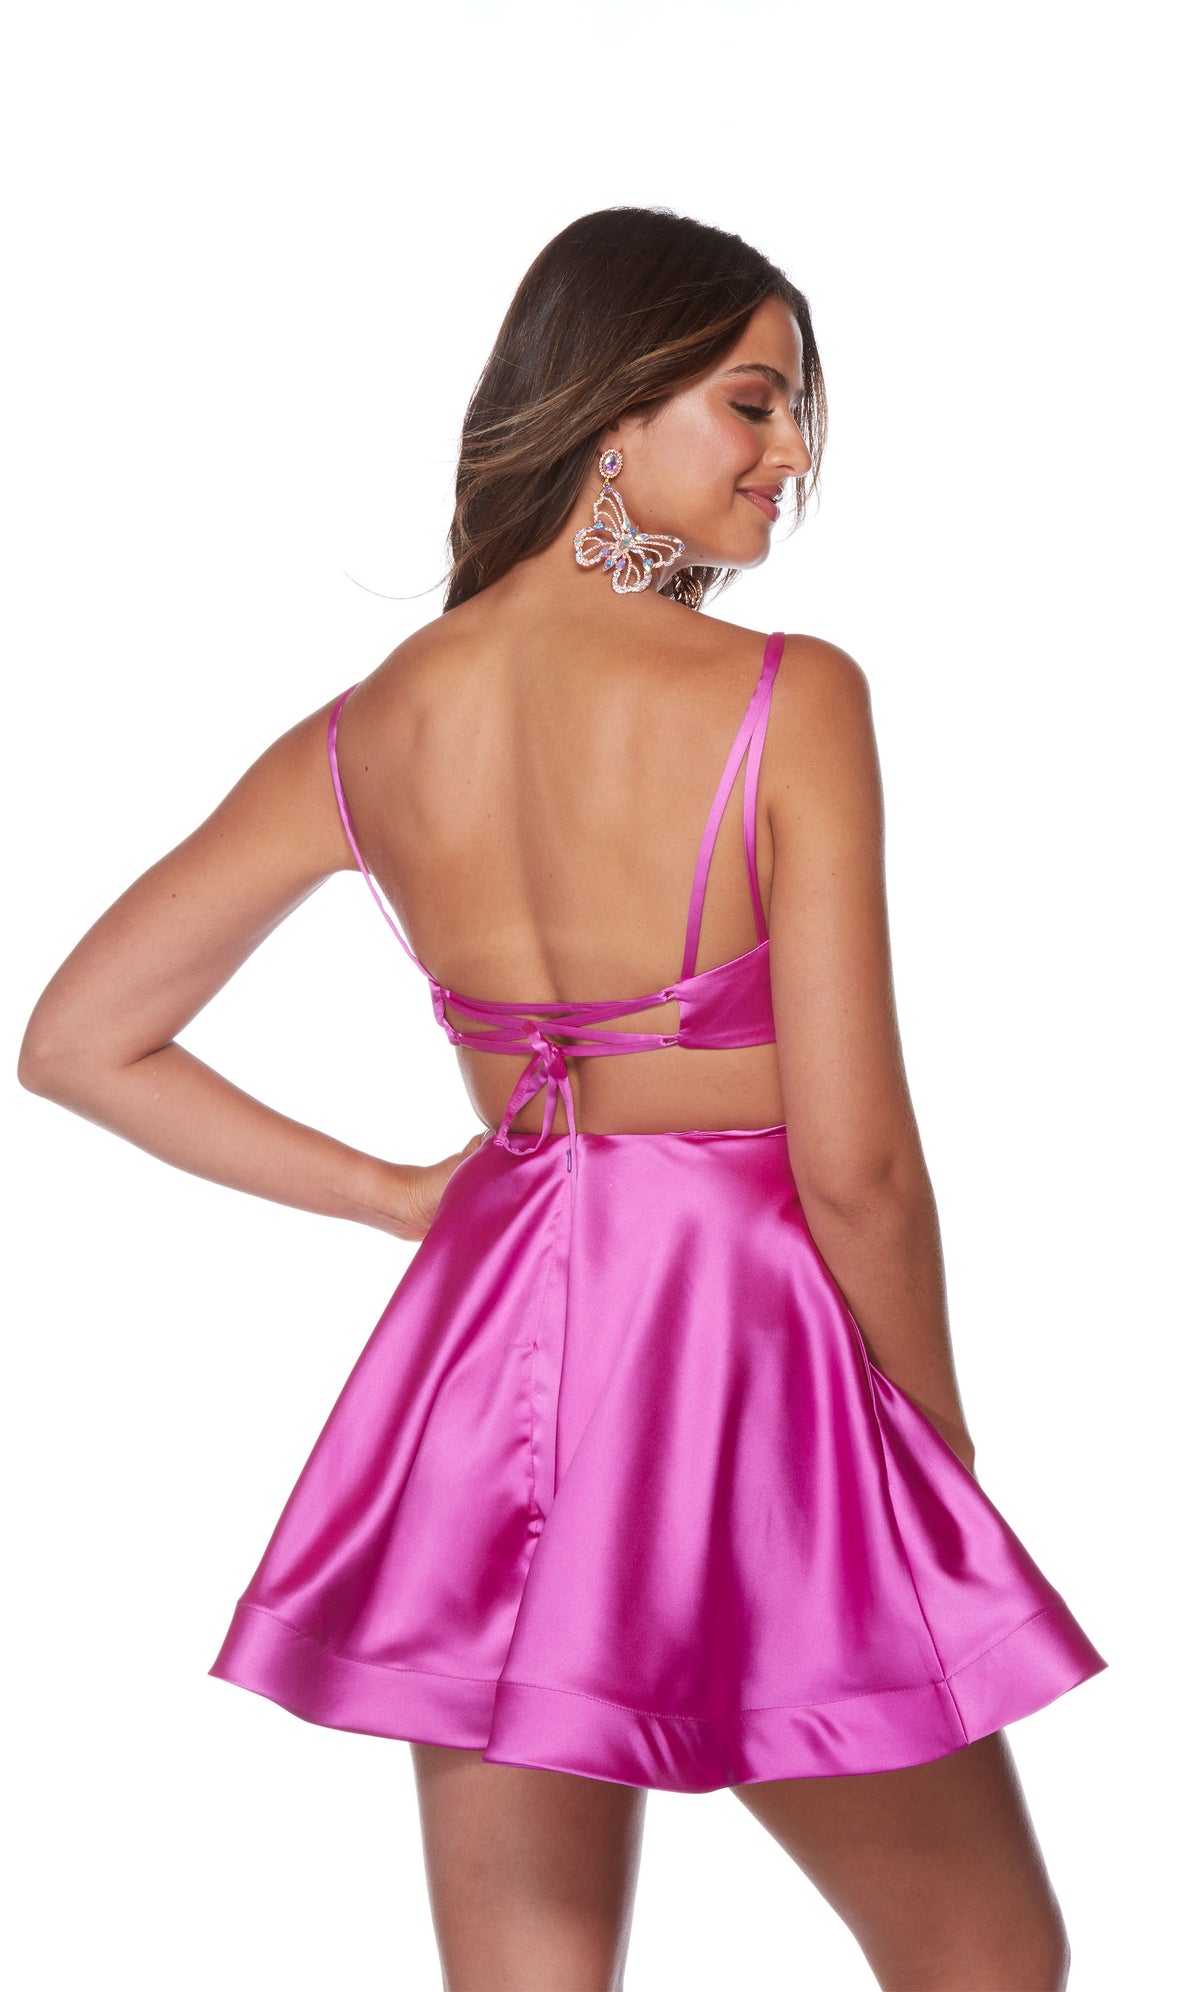 A V-neck, short satin homecoming dress with double spaghetti straps and a strappy, lace-up back in the color neon purple.